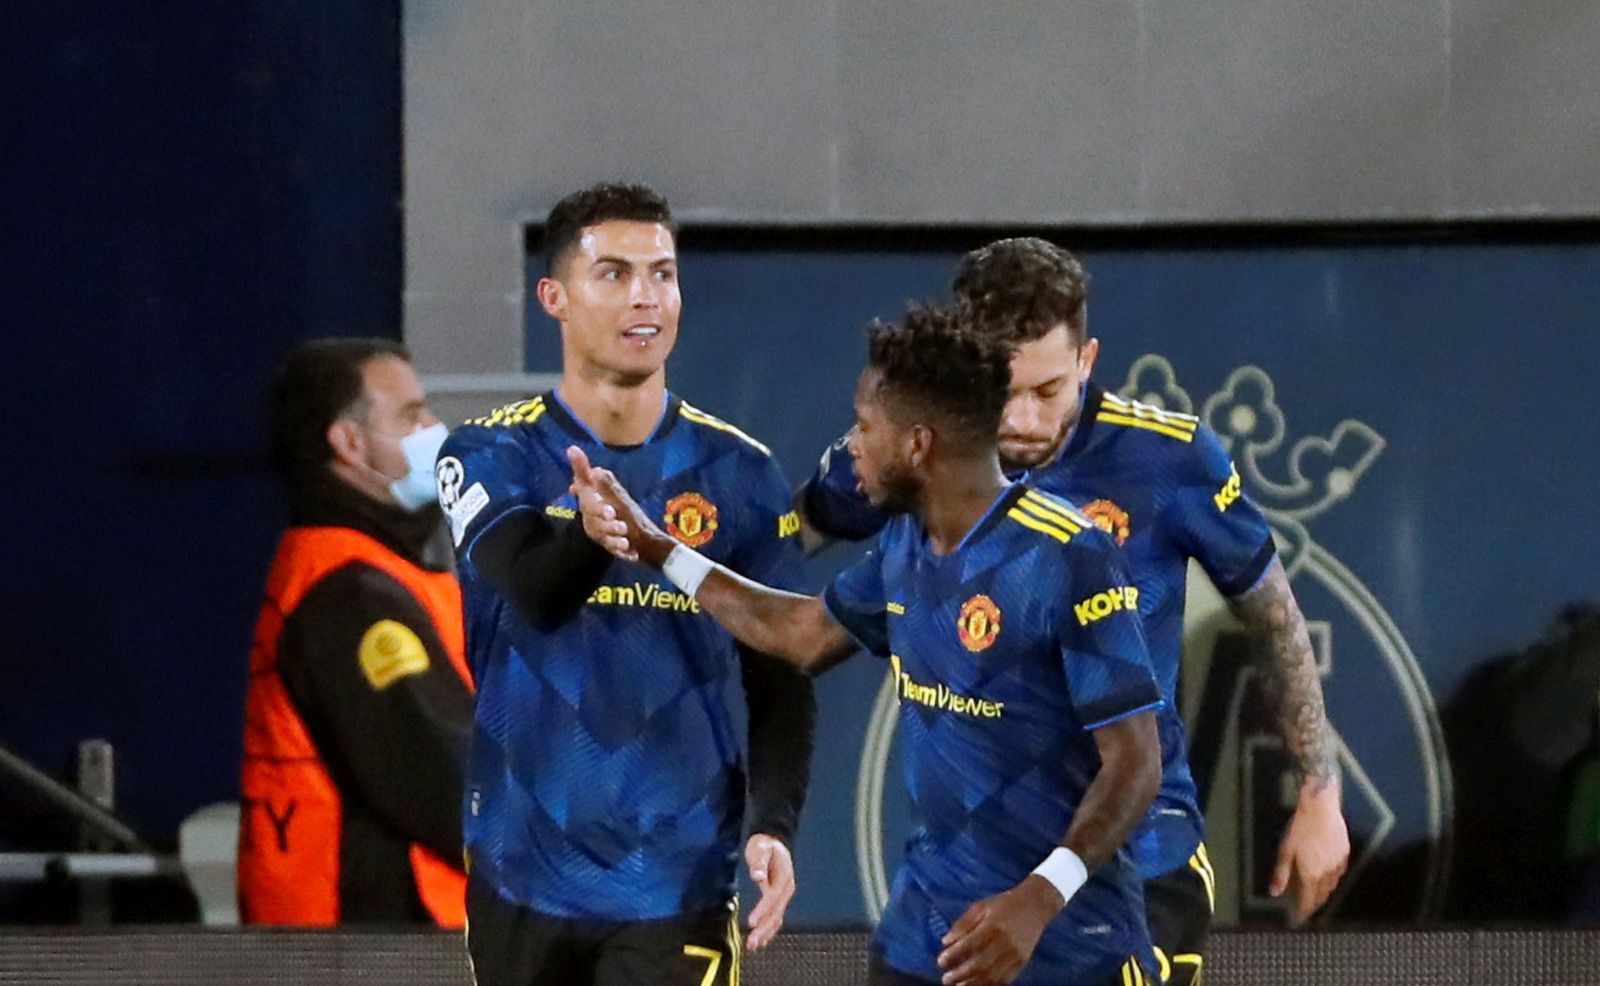 epa09599466 Manchester United's Cristiano Ronaldo (L) celebrates with his teammates after scoring the 0-1 goal during the UEFA Champions League group F between Villarreal CF and Manchester United at La Ceramica stadium in Vila-real, eastern Spain, 23 November 2021.  EPA/Biel Alino